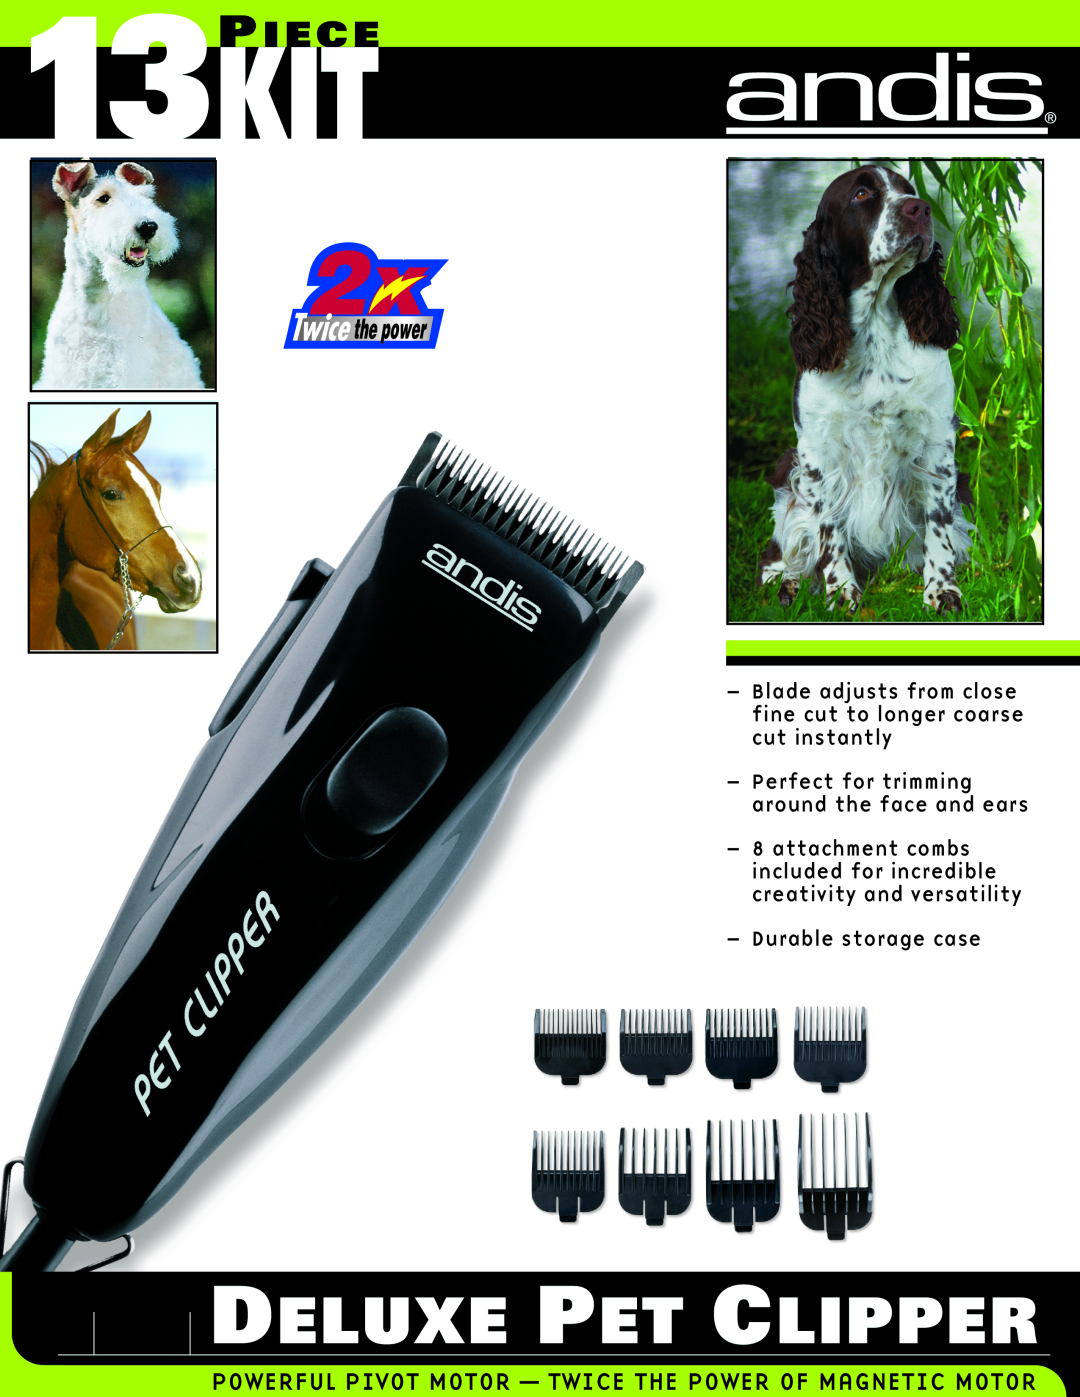 Andis Company PM-1 120V manual Deluxe Pet Clipper, Powerful Pivot Motor - Twice The Power Of Magnetic Motor, 13KITP IECE 